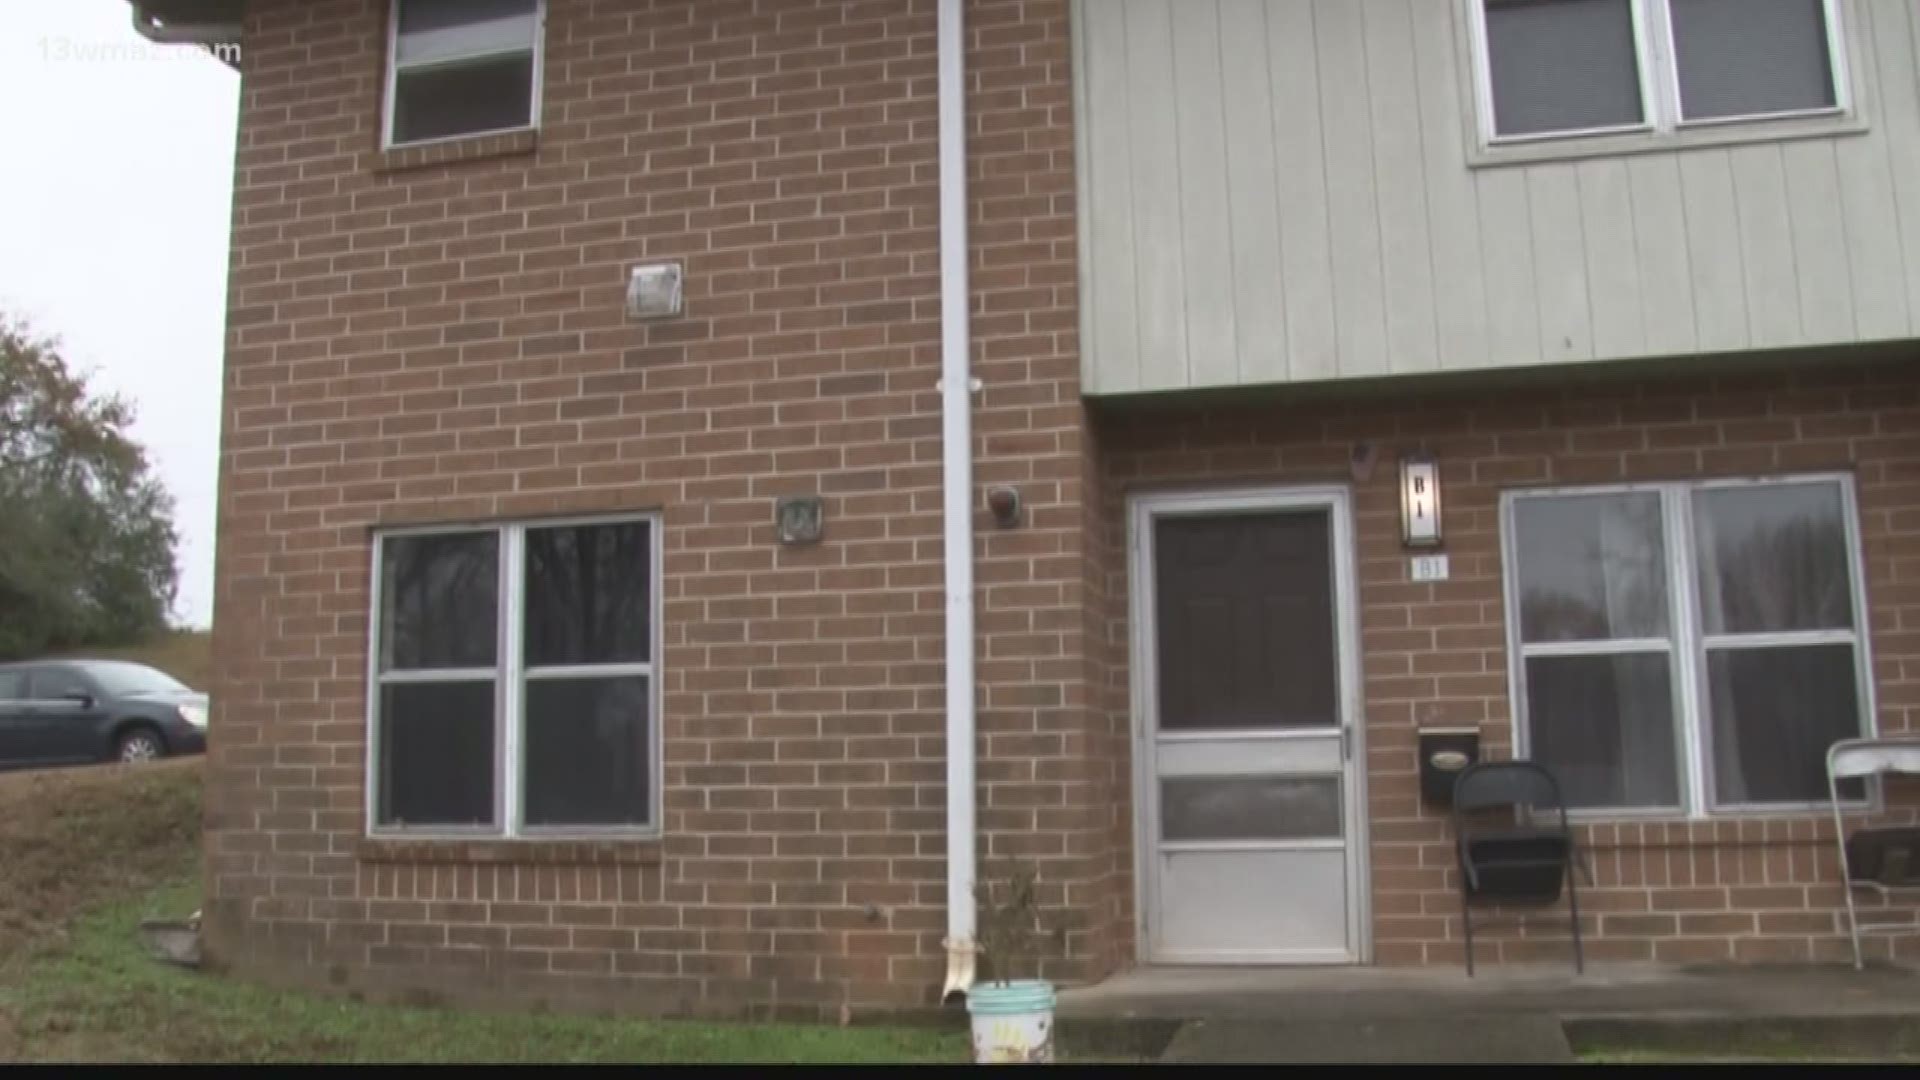 The Milledgeville Housing Authority is spending $2.3 million on a renovation project for their apartment properties